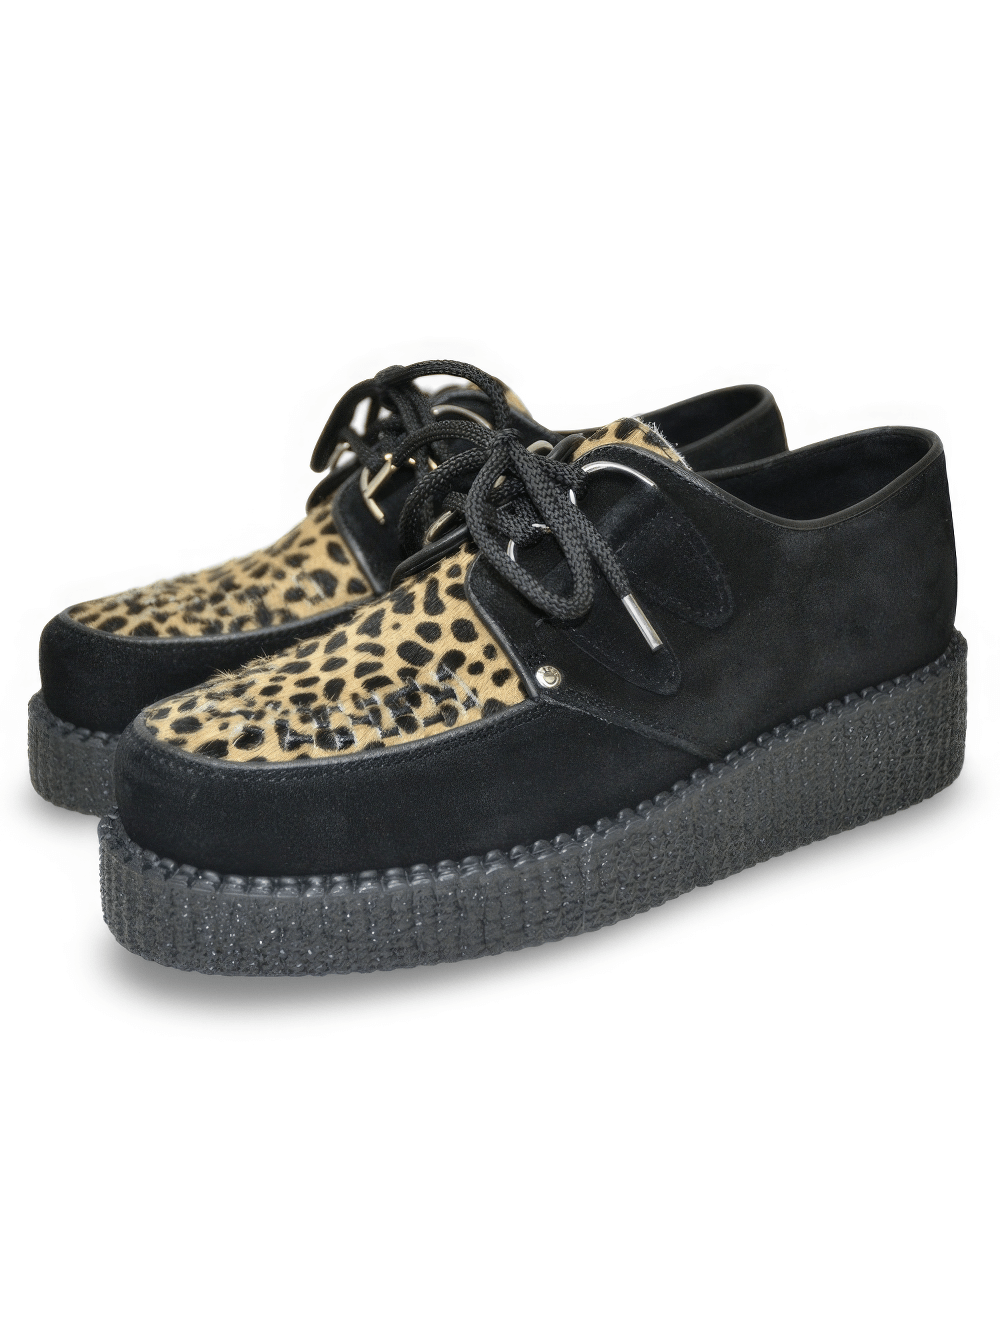 Black and Leopard Suede Creepers with Rubber Sole